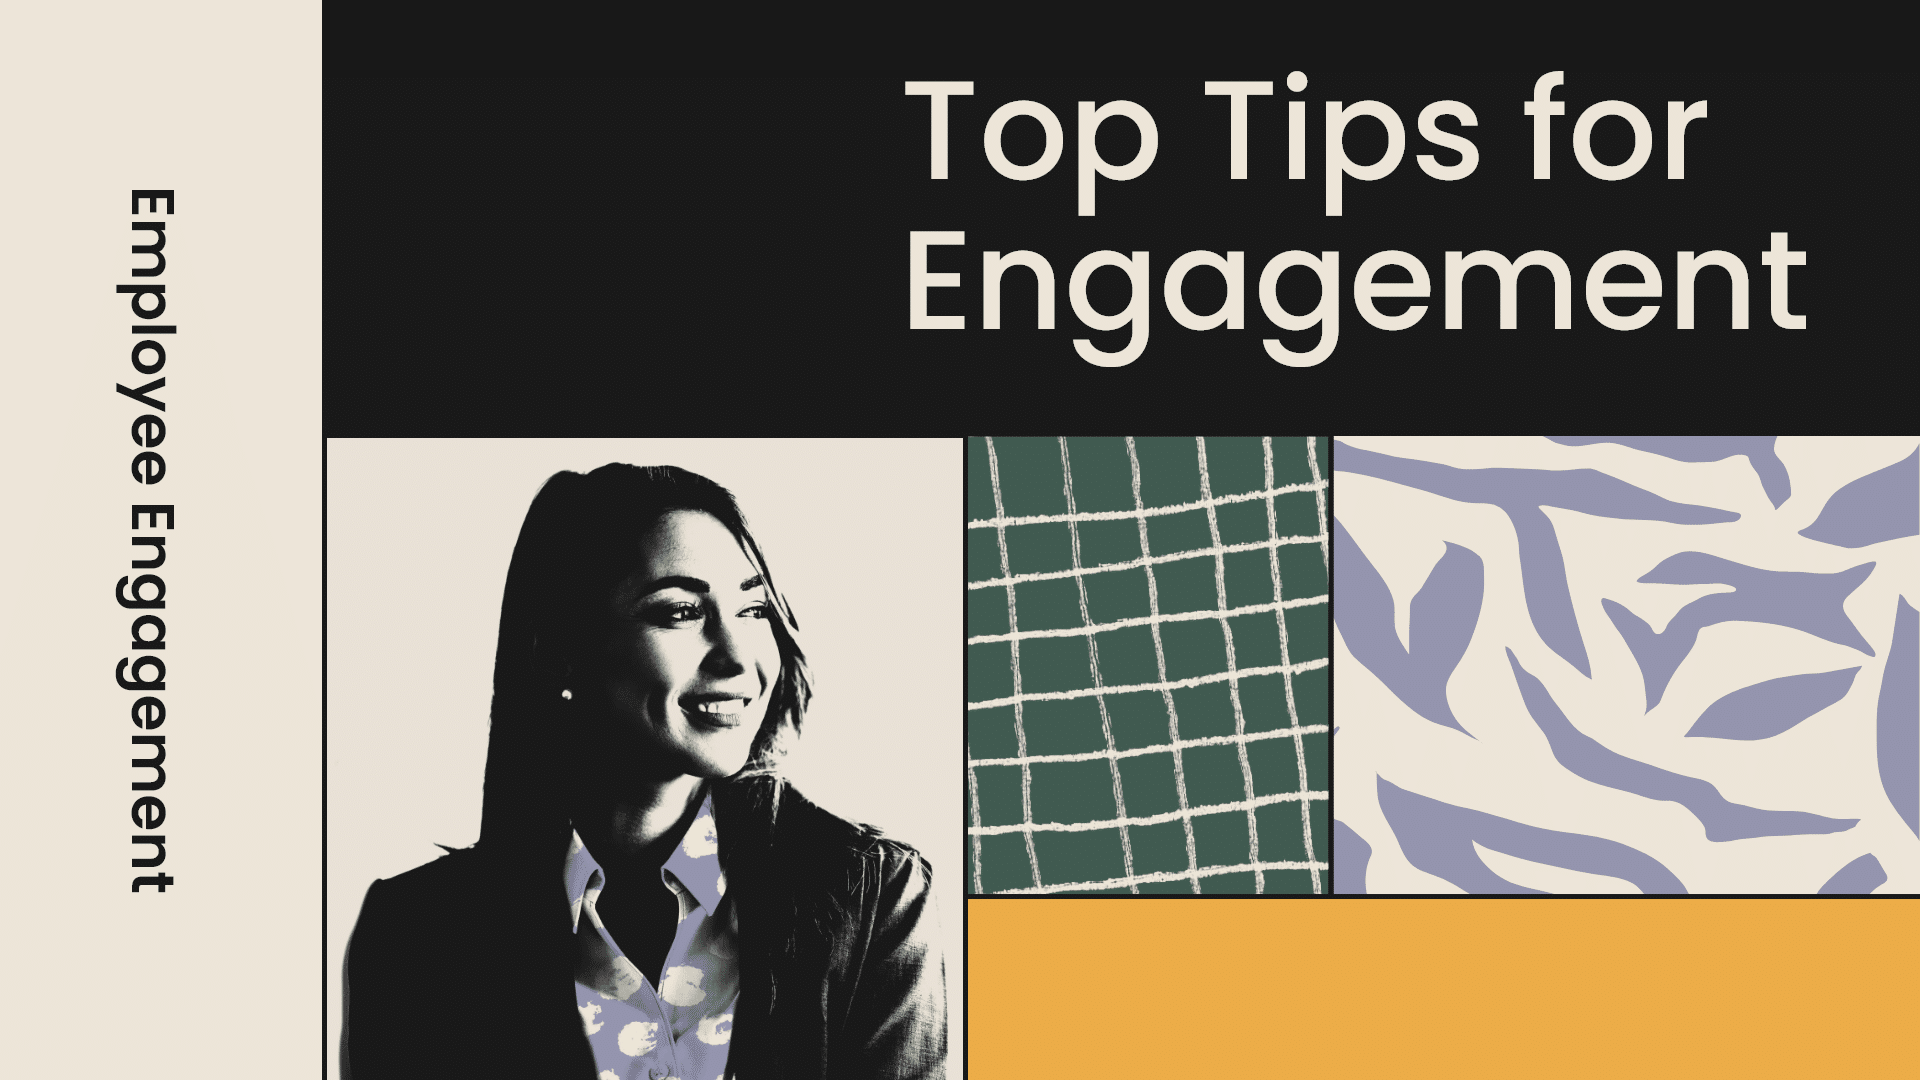 Cover photo of women and title "Top Tips for Engagement"